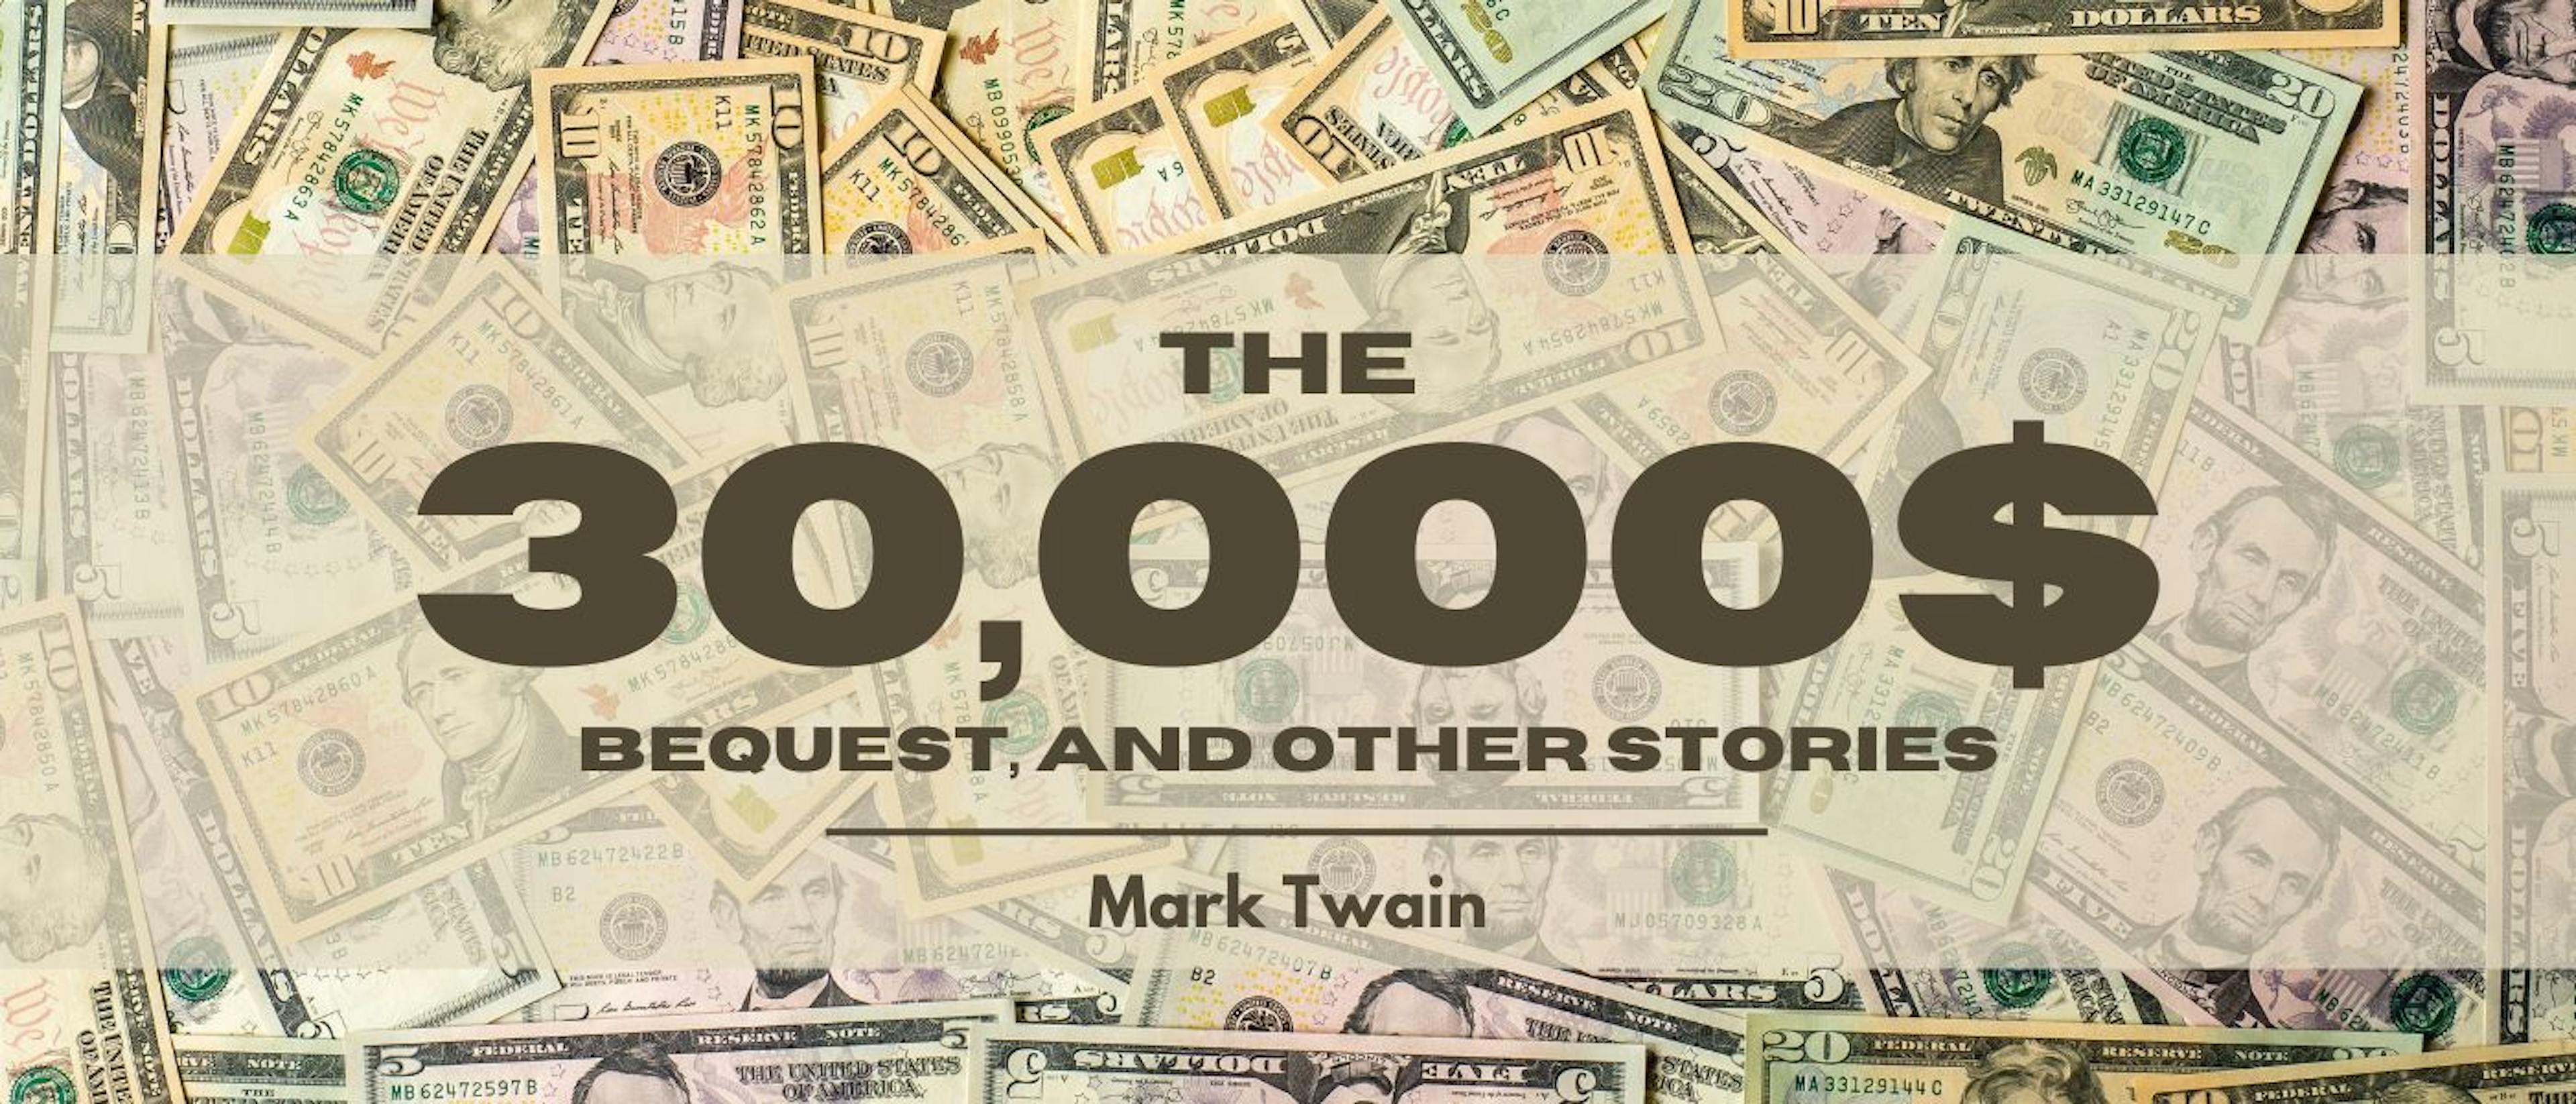 featured image - The $30,000 Bequest, and Other Stories by Mark Twain - Table of Links